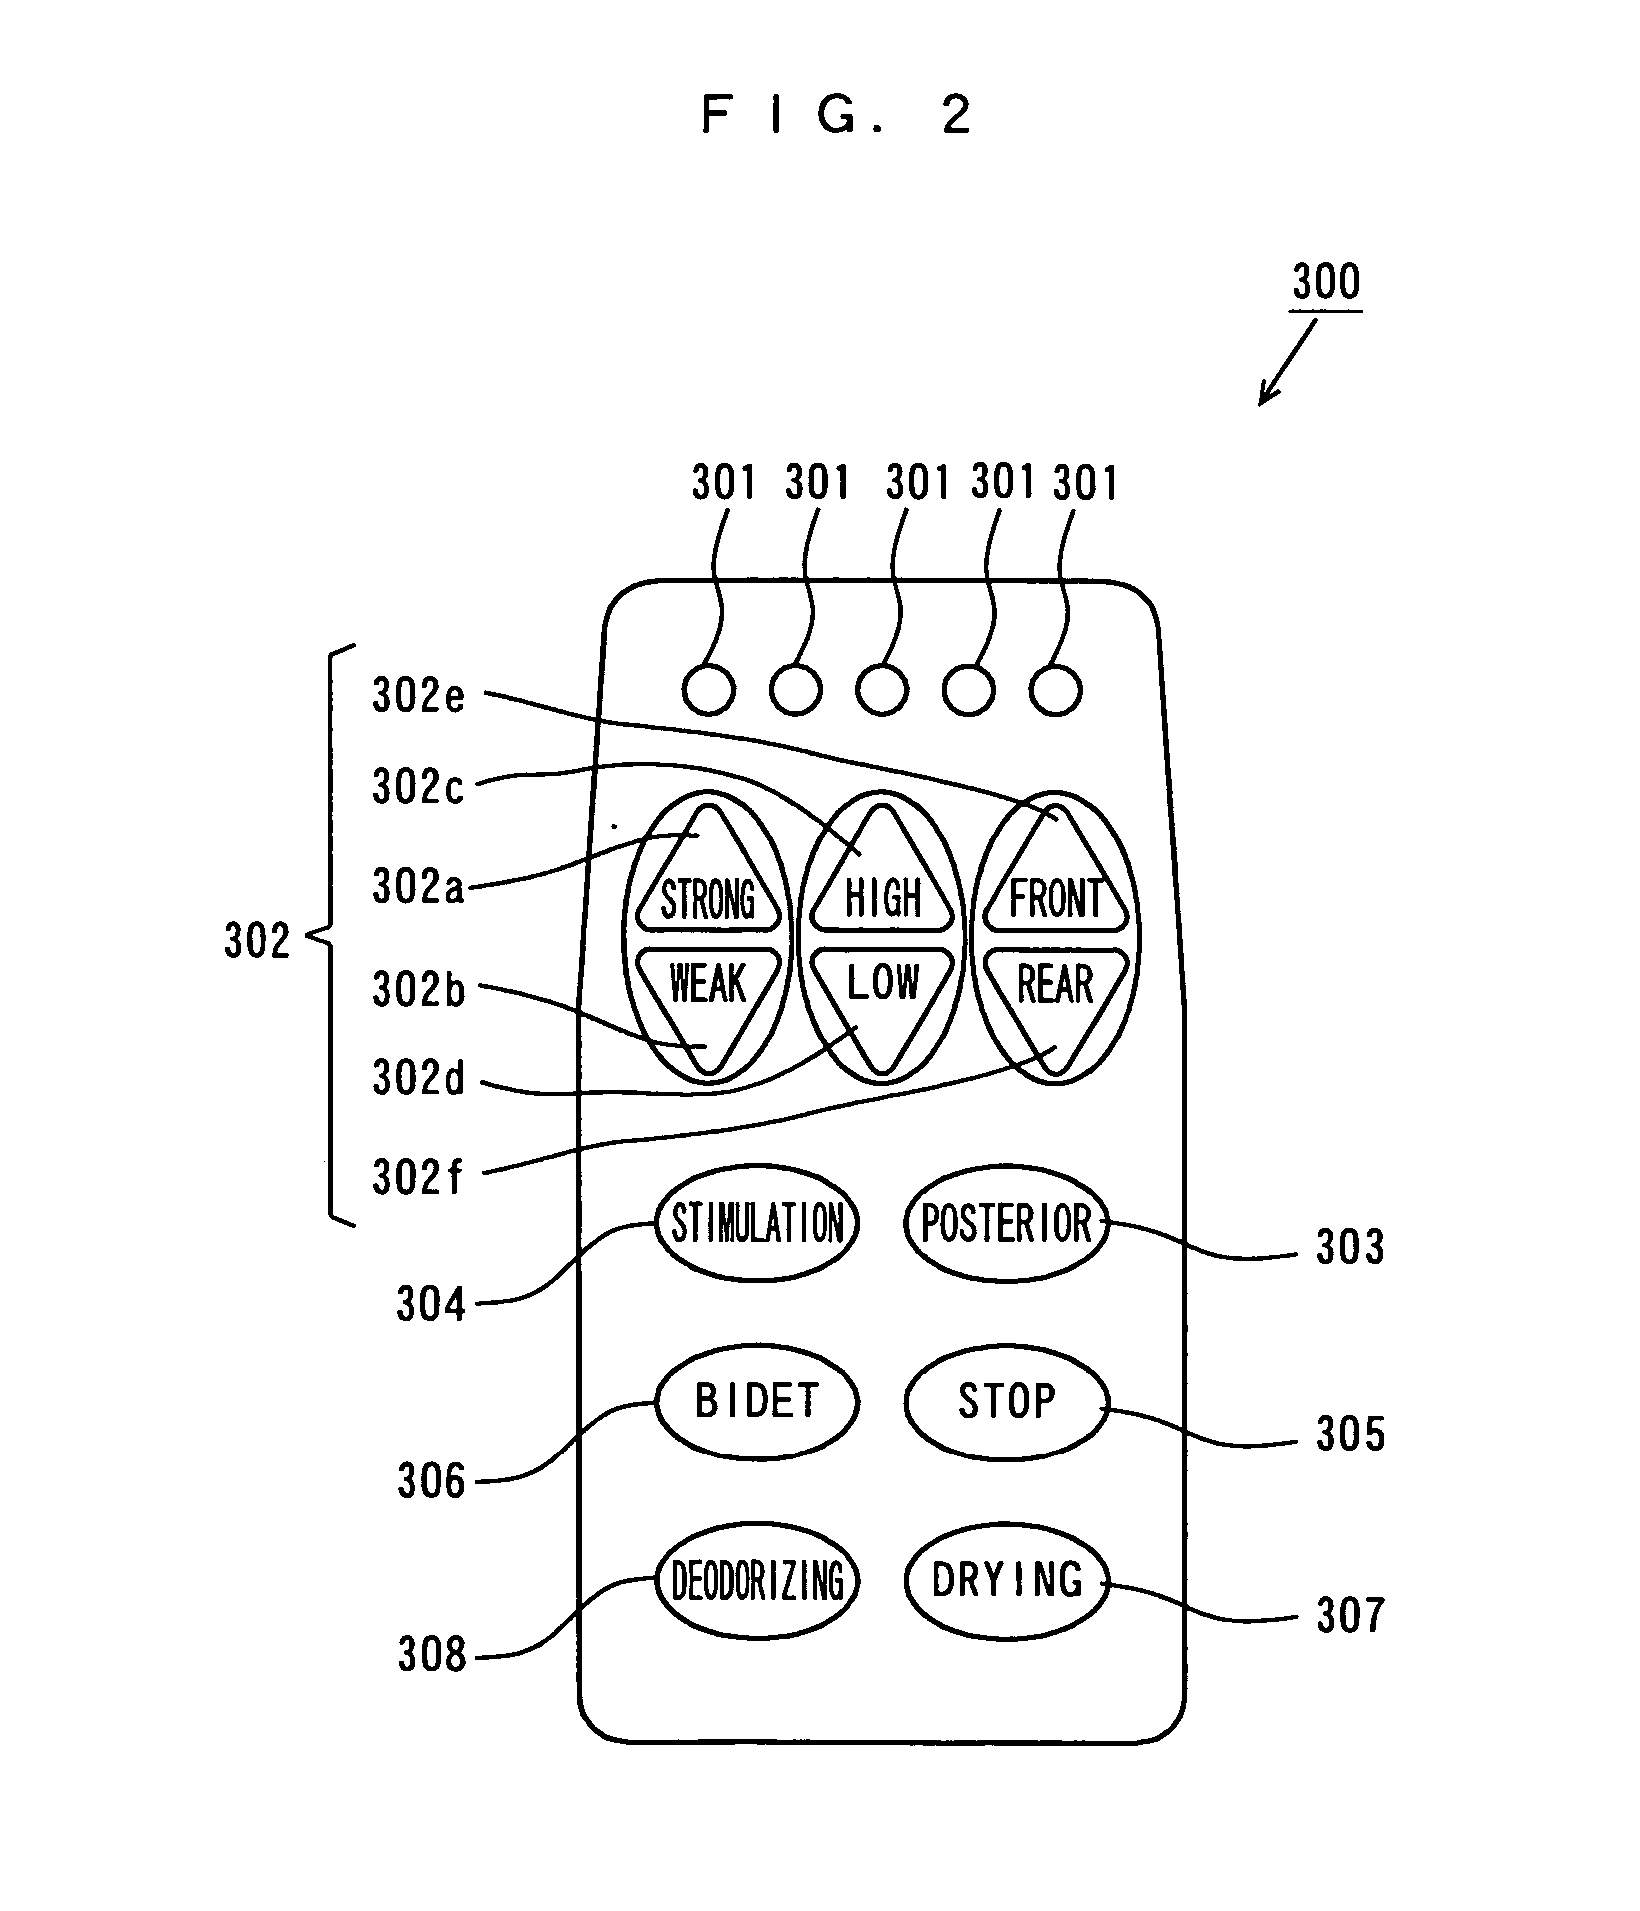 Nozzle device and hygienic washing device